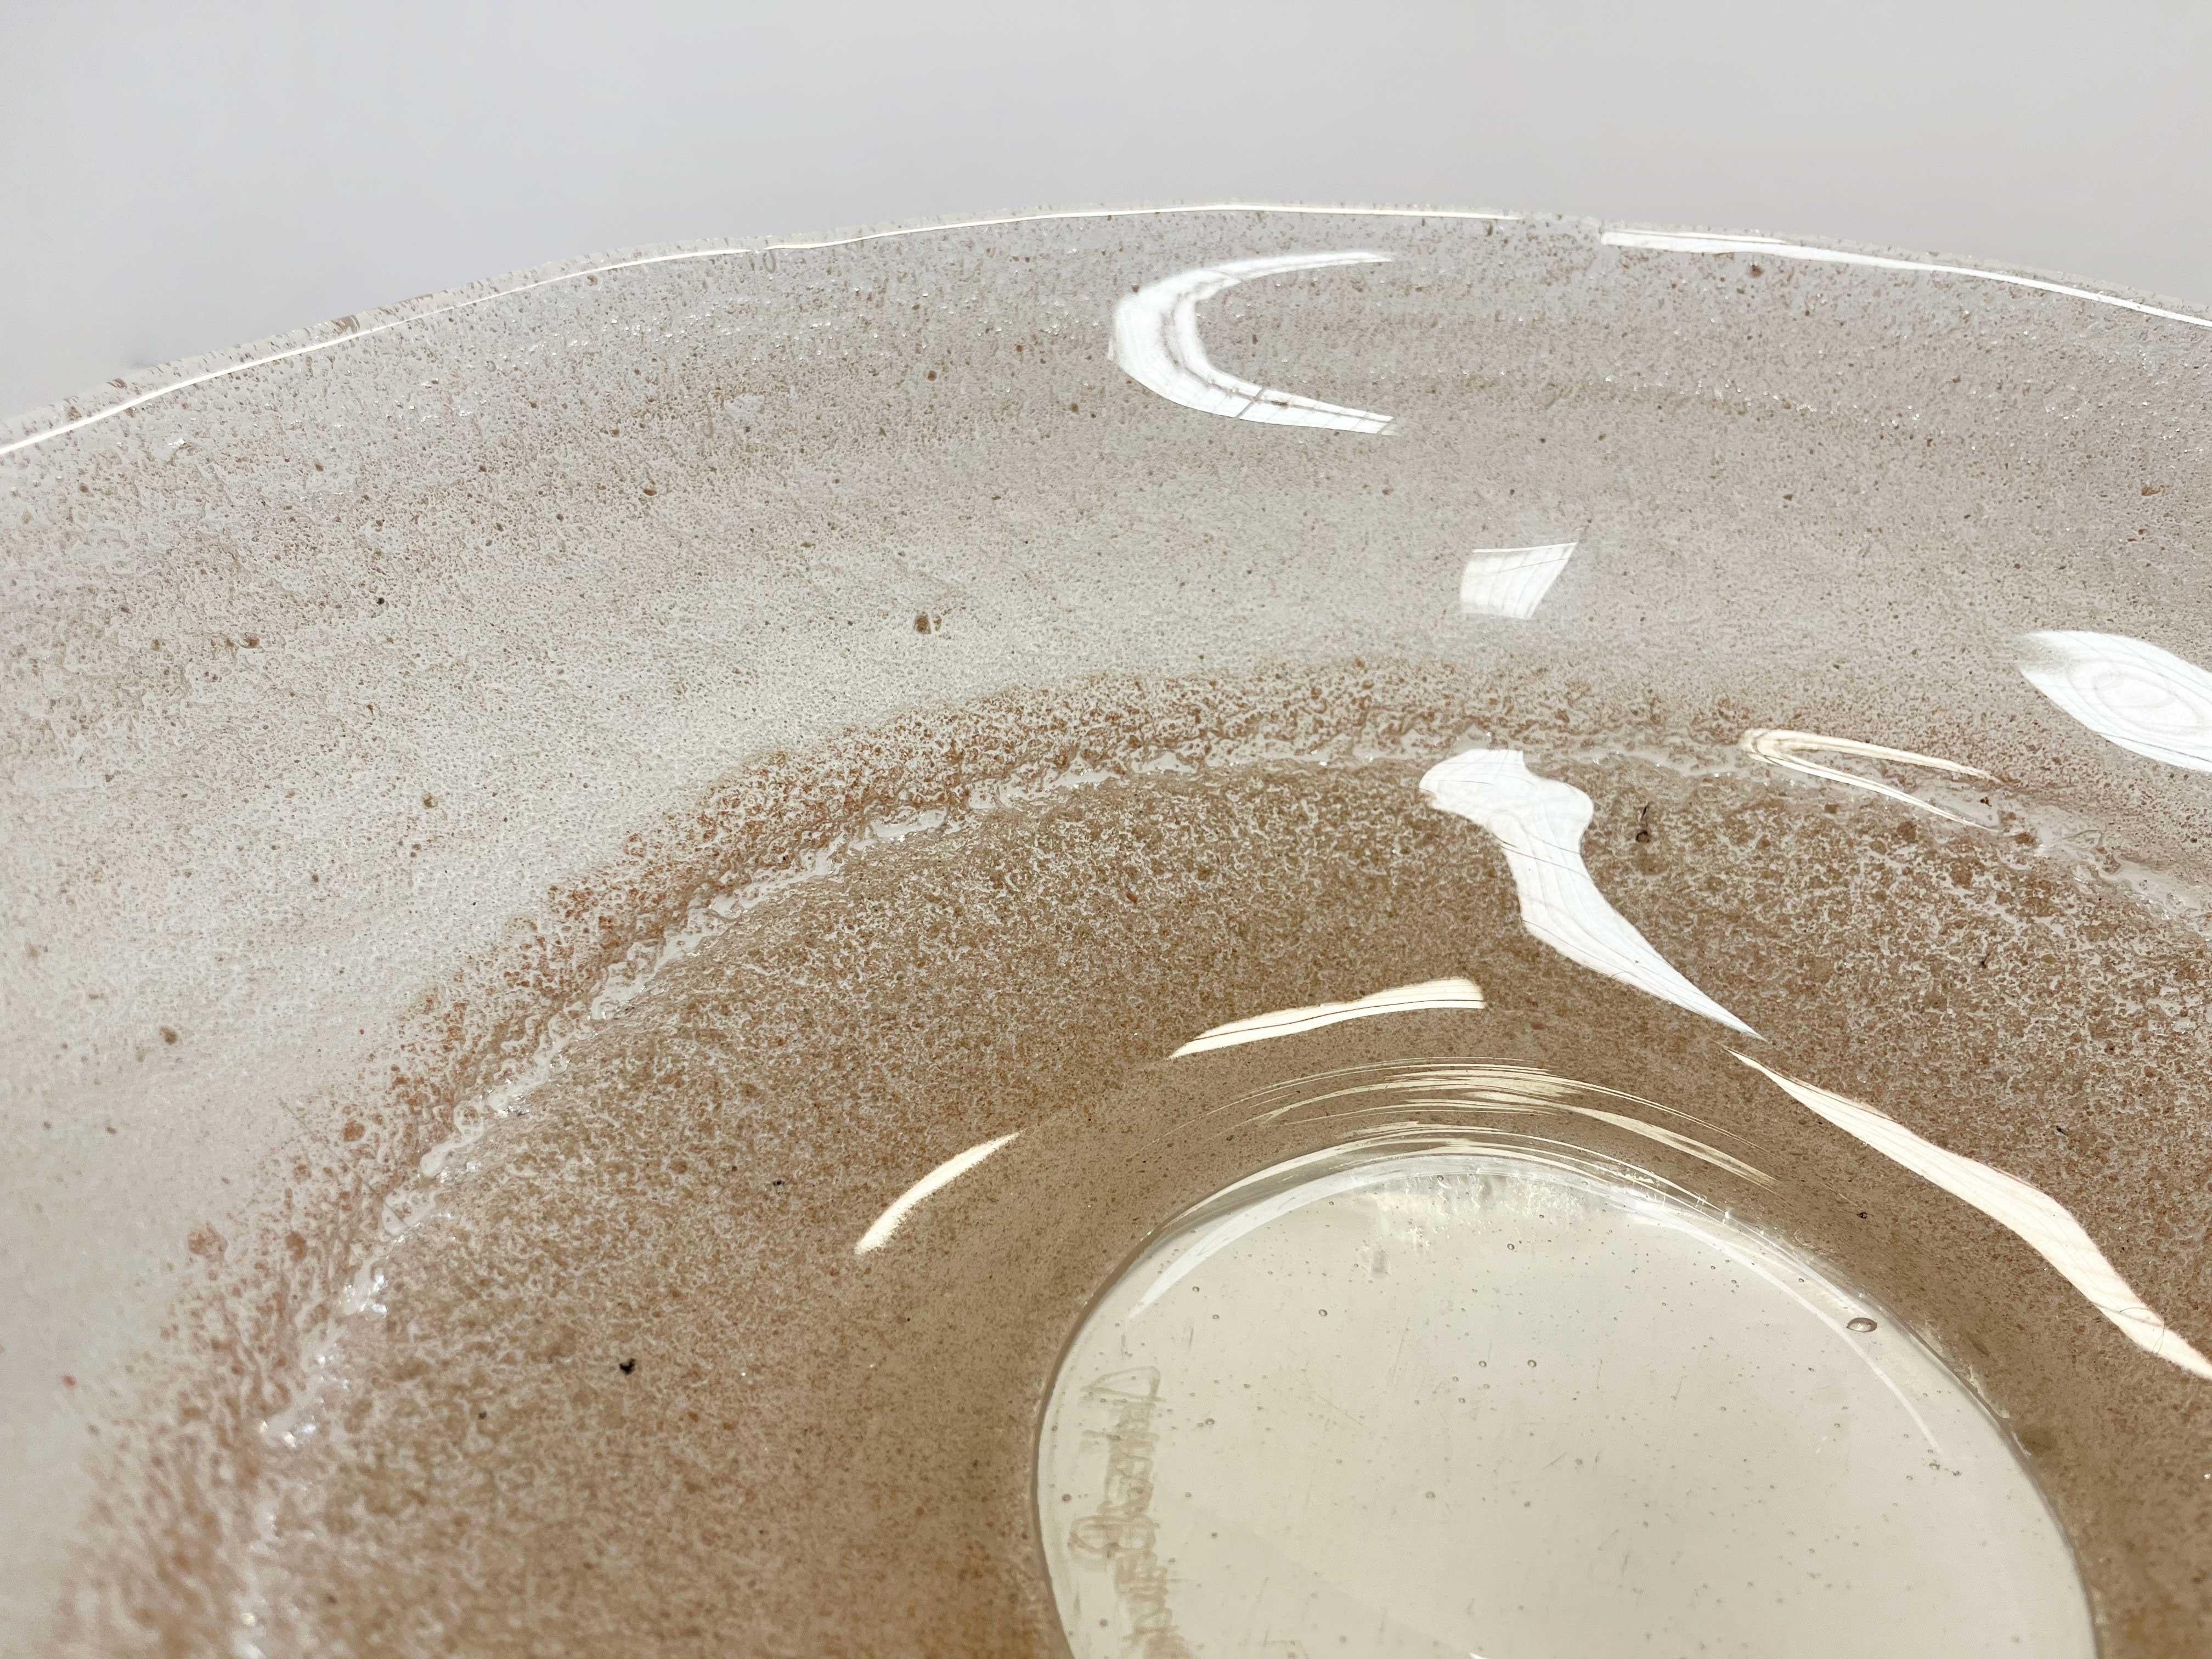 Sandcast Bowl II - Gray Abstract Sculpture by Andrew Beauchamp